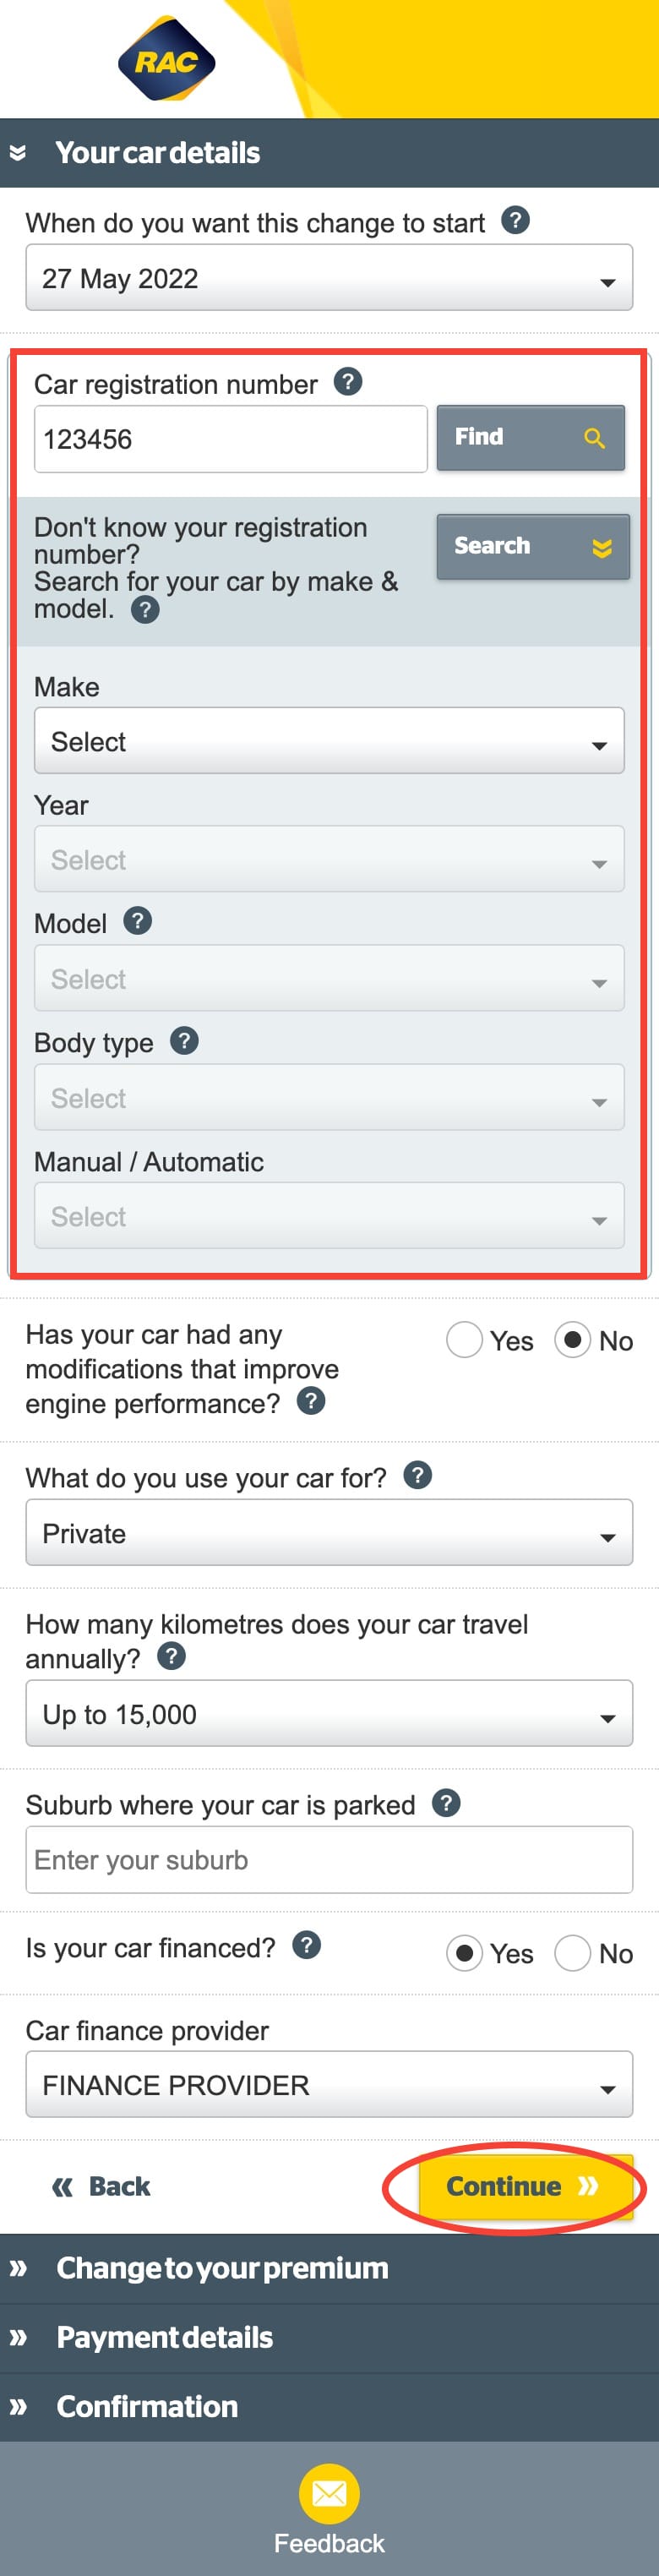 Updating your new car details on Mobile